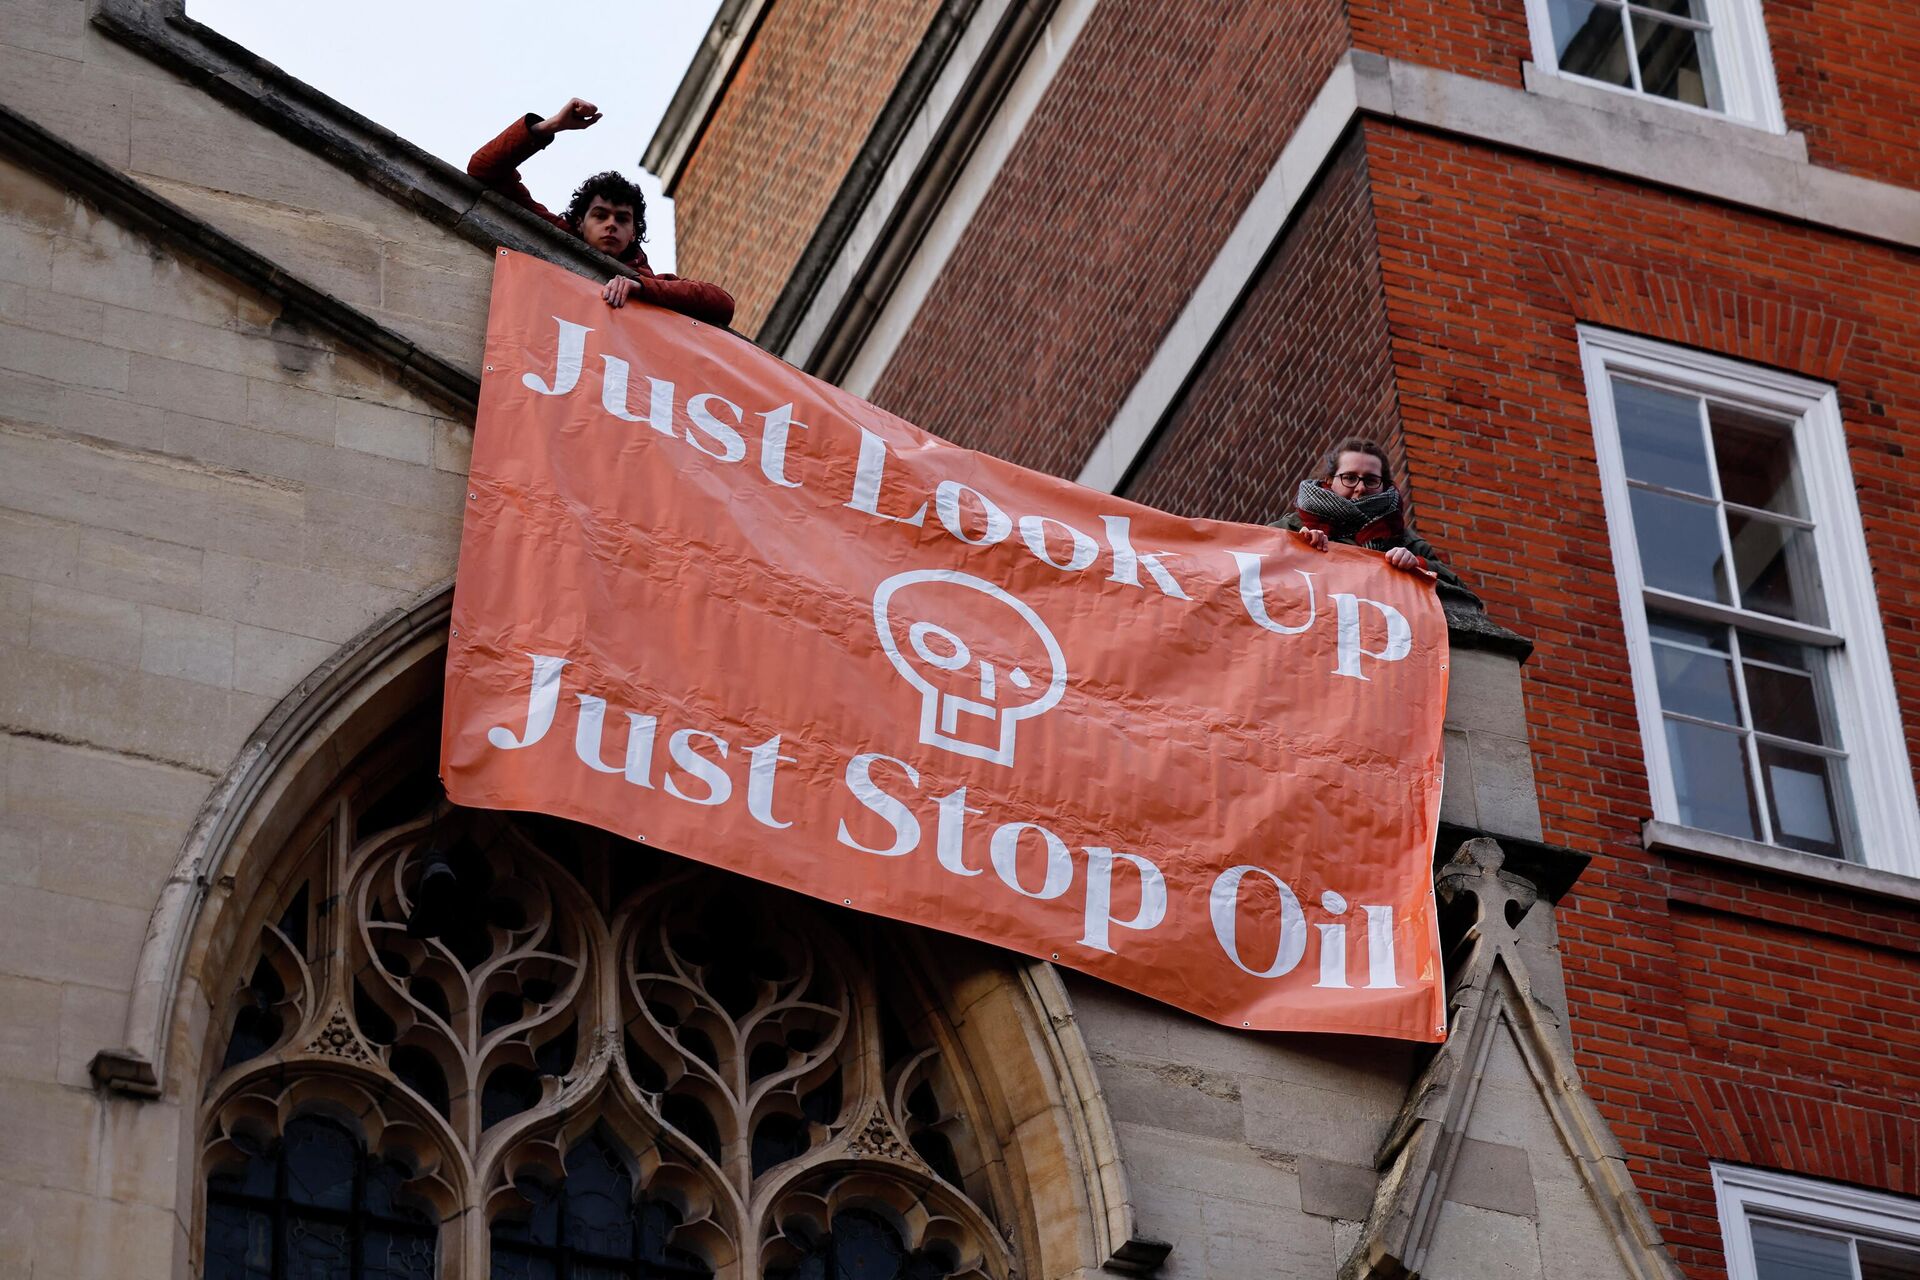 Activists from the Just Stop Oil campaign group protest against the use of oil after the arrivals for the BAFTA British Academy Film Awards at the Royal Albert Hall, in London, on March 13, 2022. - Sputnik International, 1920, 28.10.2022